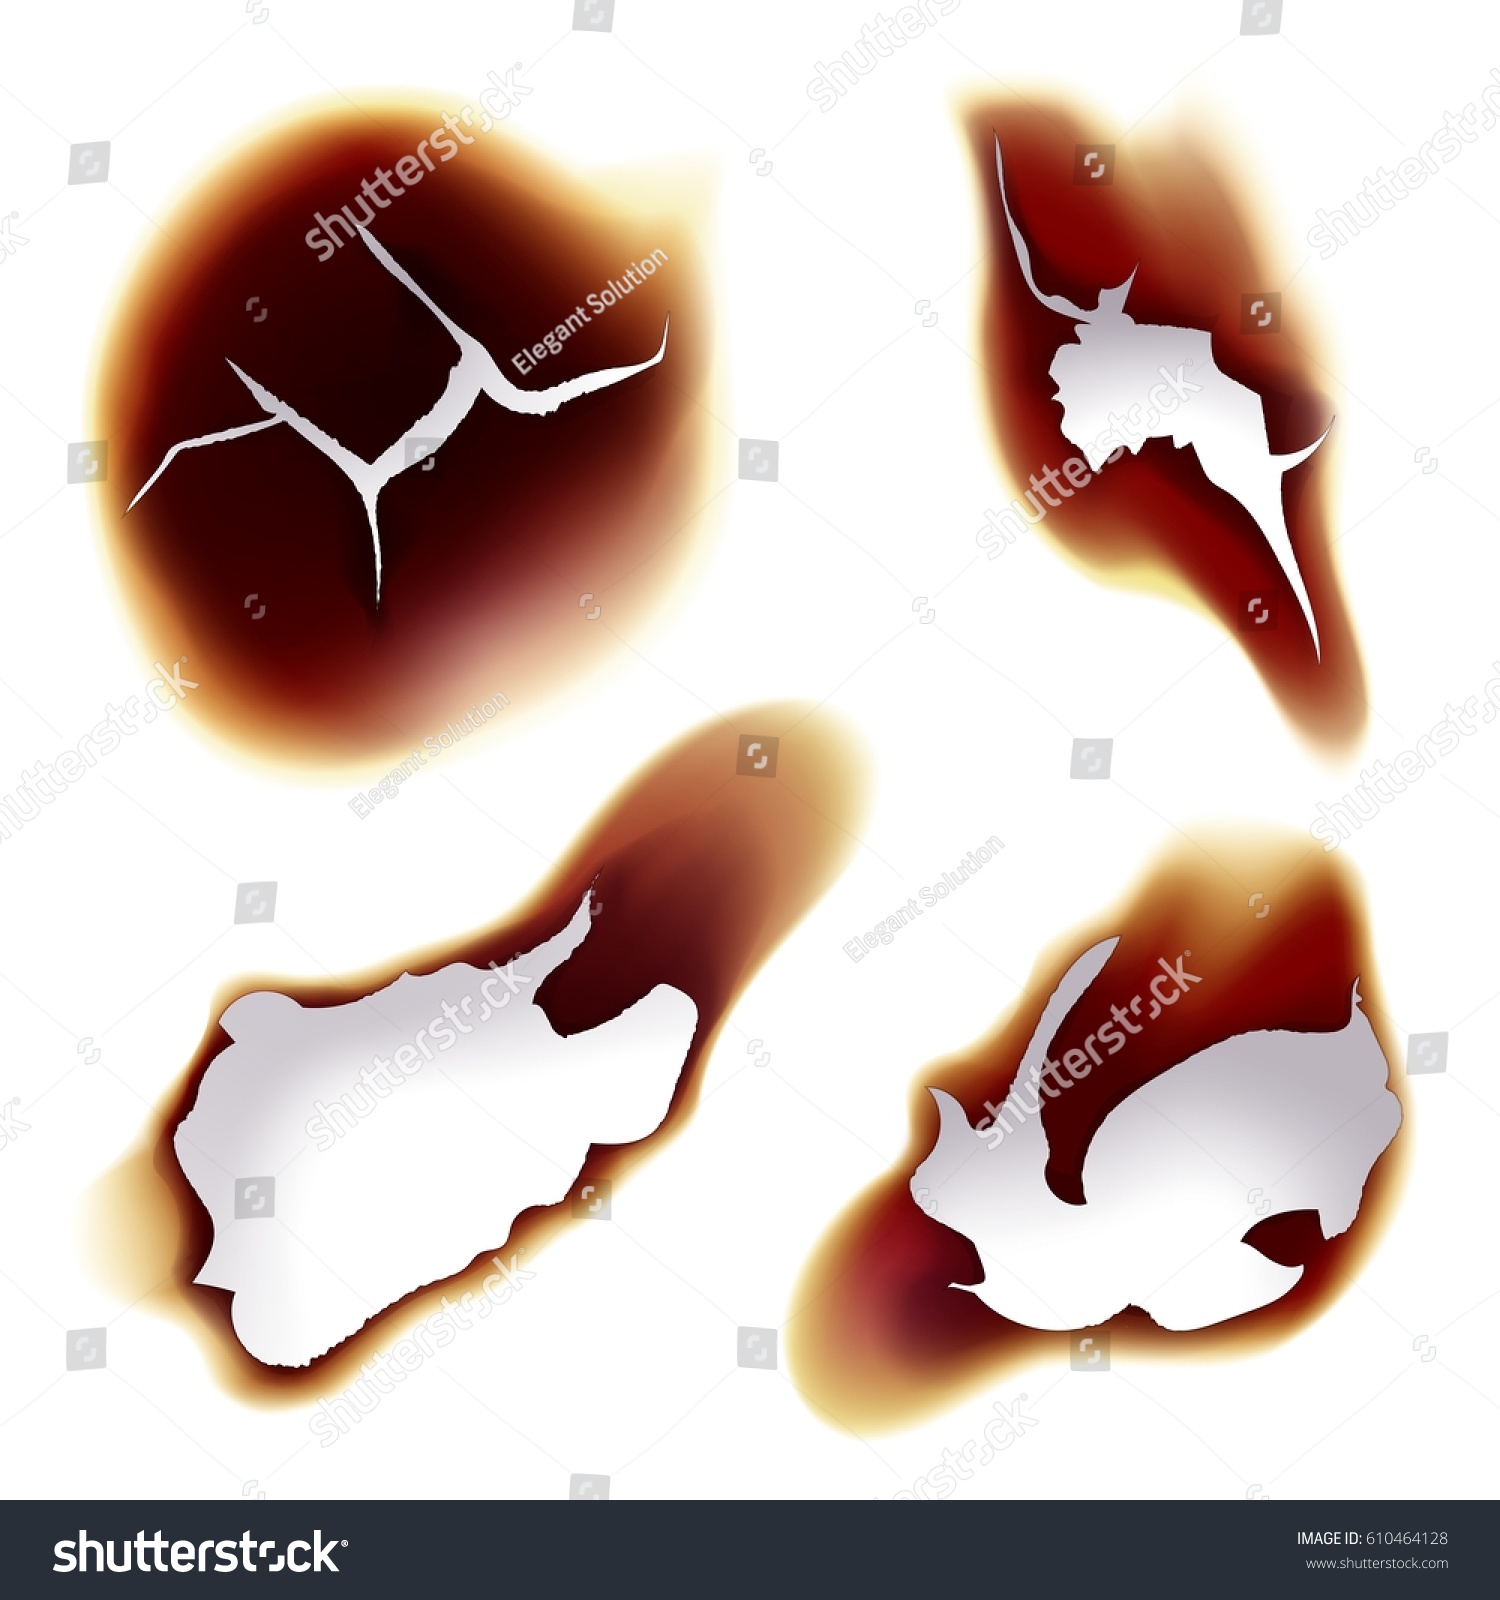 Holes On Sheet Paper Caused By Stock Vector 610464128 - Shutterstock